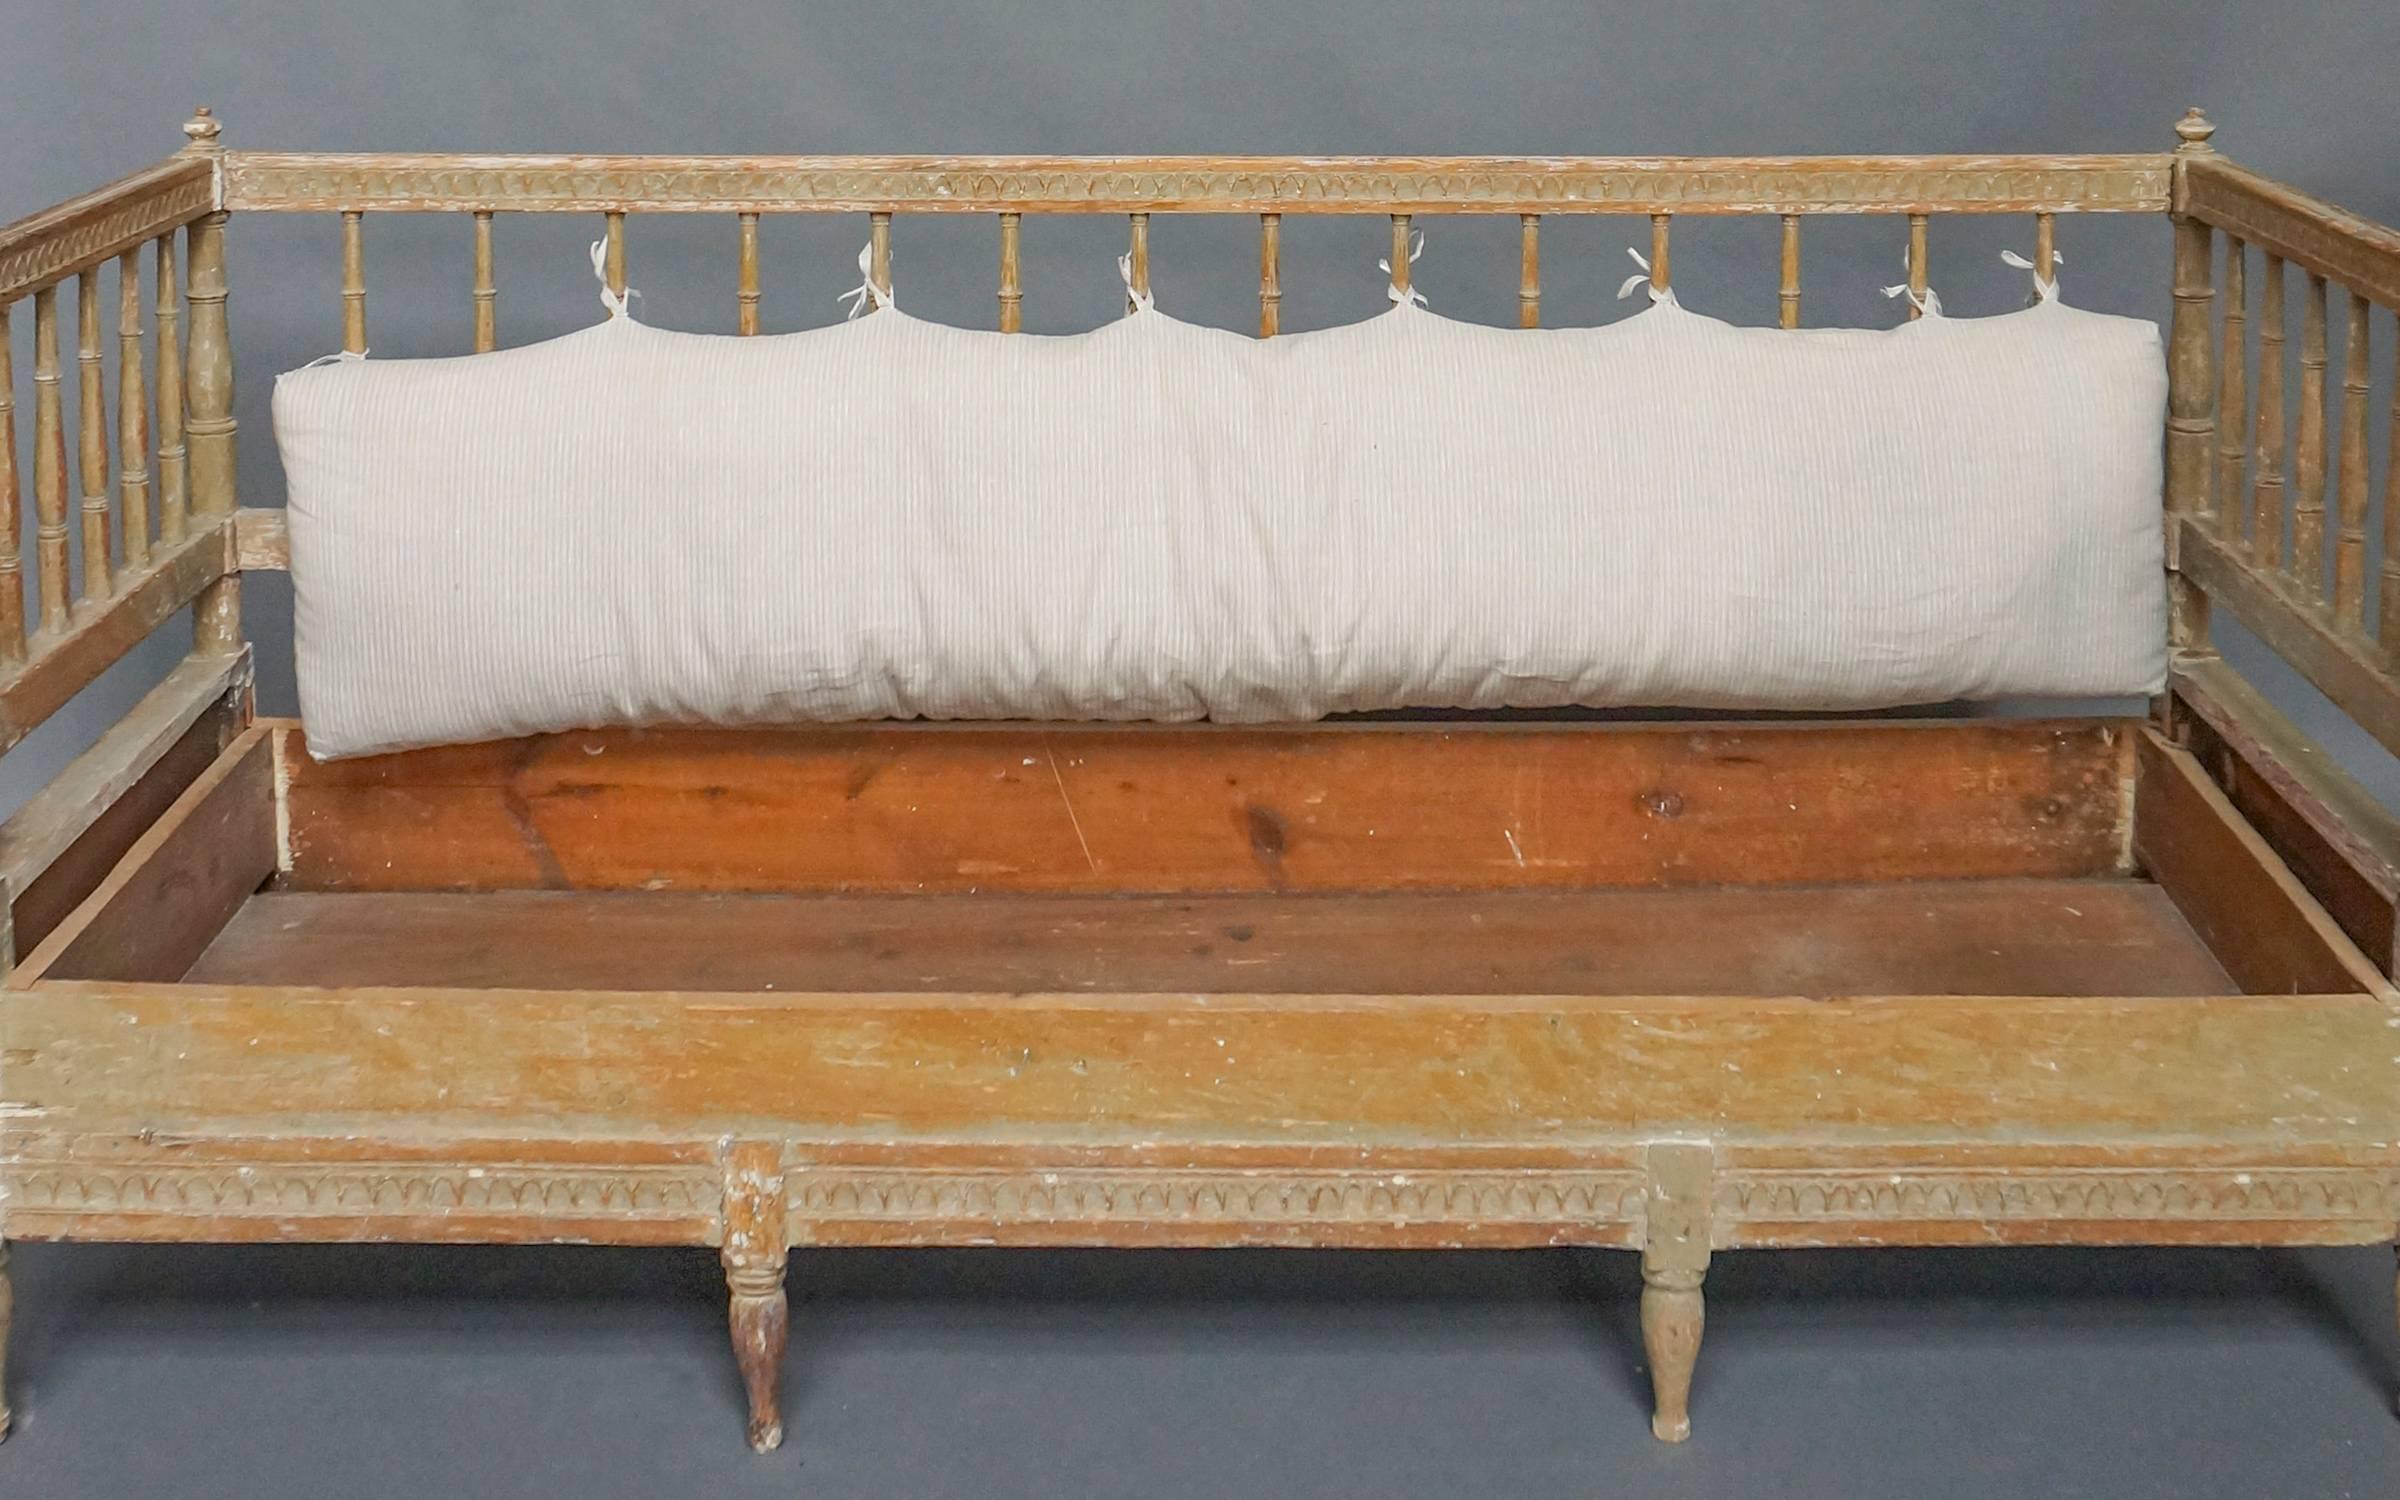 18th Century Swedish Sofa from the Gustavian Period in Original Paint